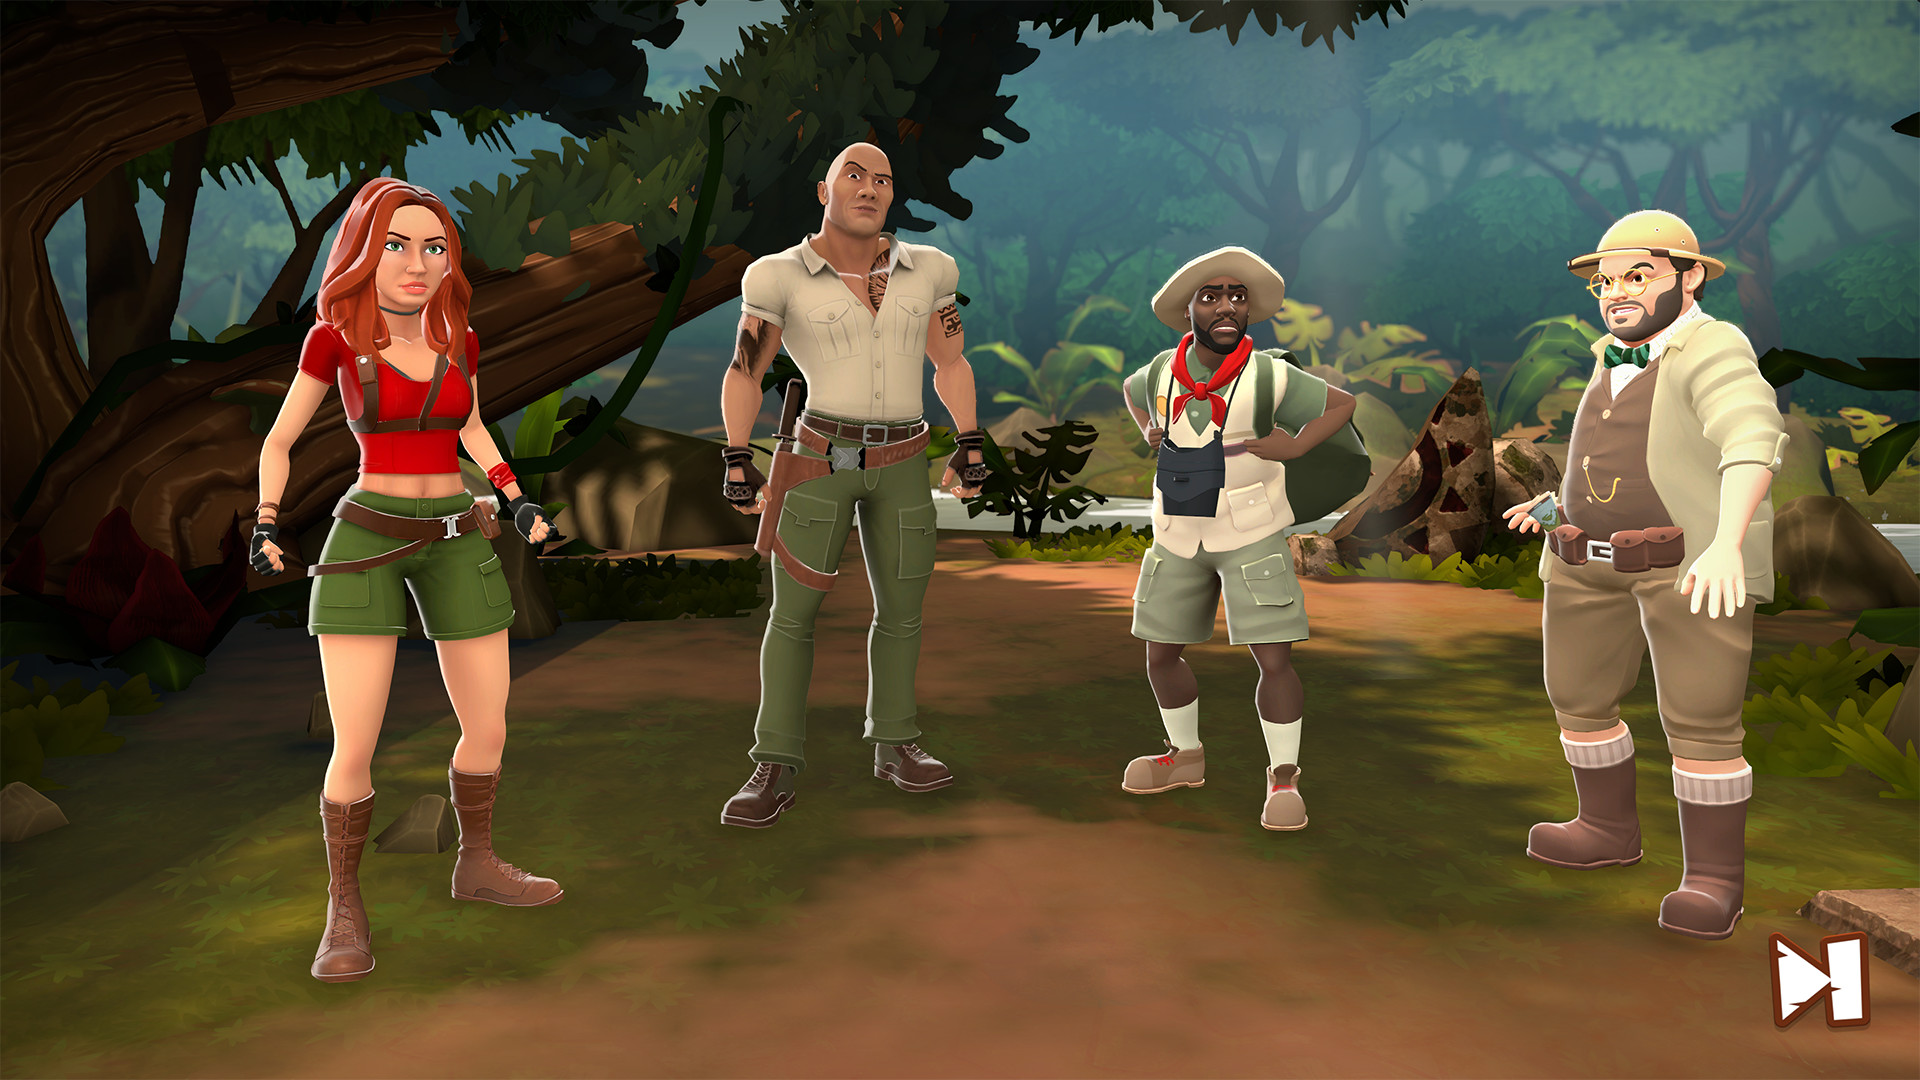 JUMANJI - Welcome to the Jungle Expansion Featured Screenshot #1